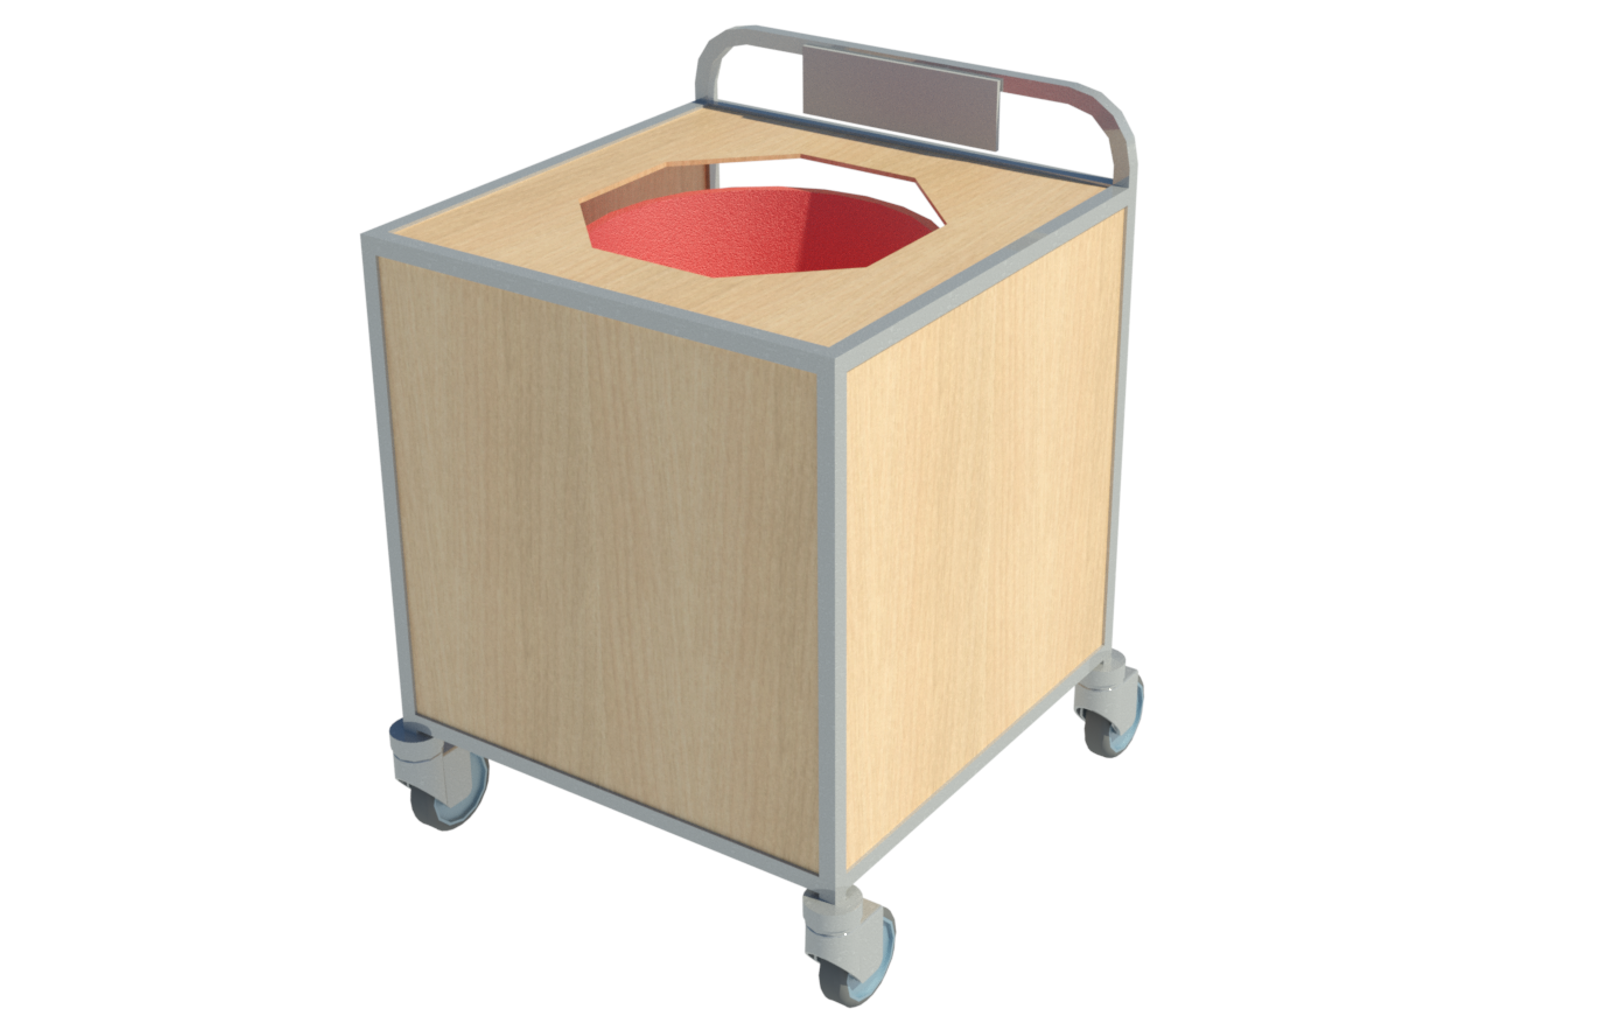 Revit family of food waste trolley from Health and Care.